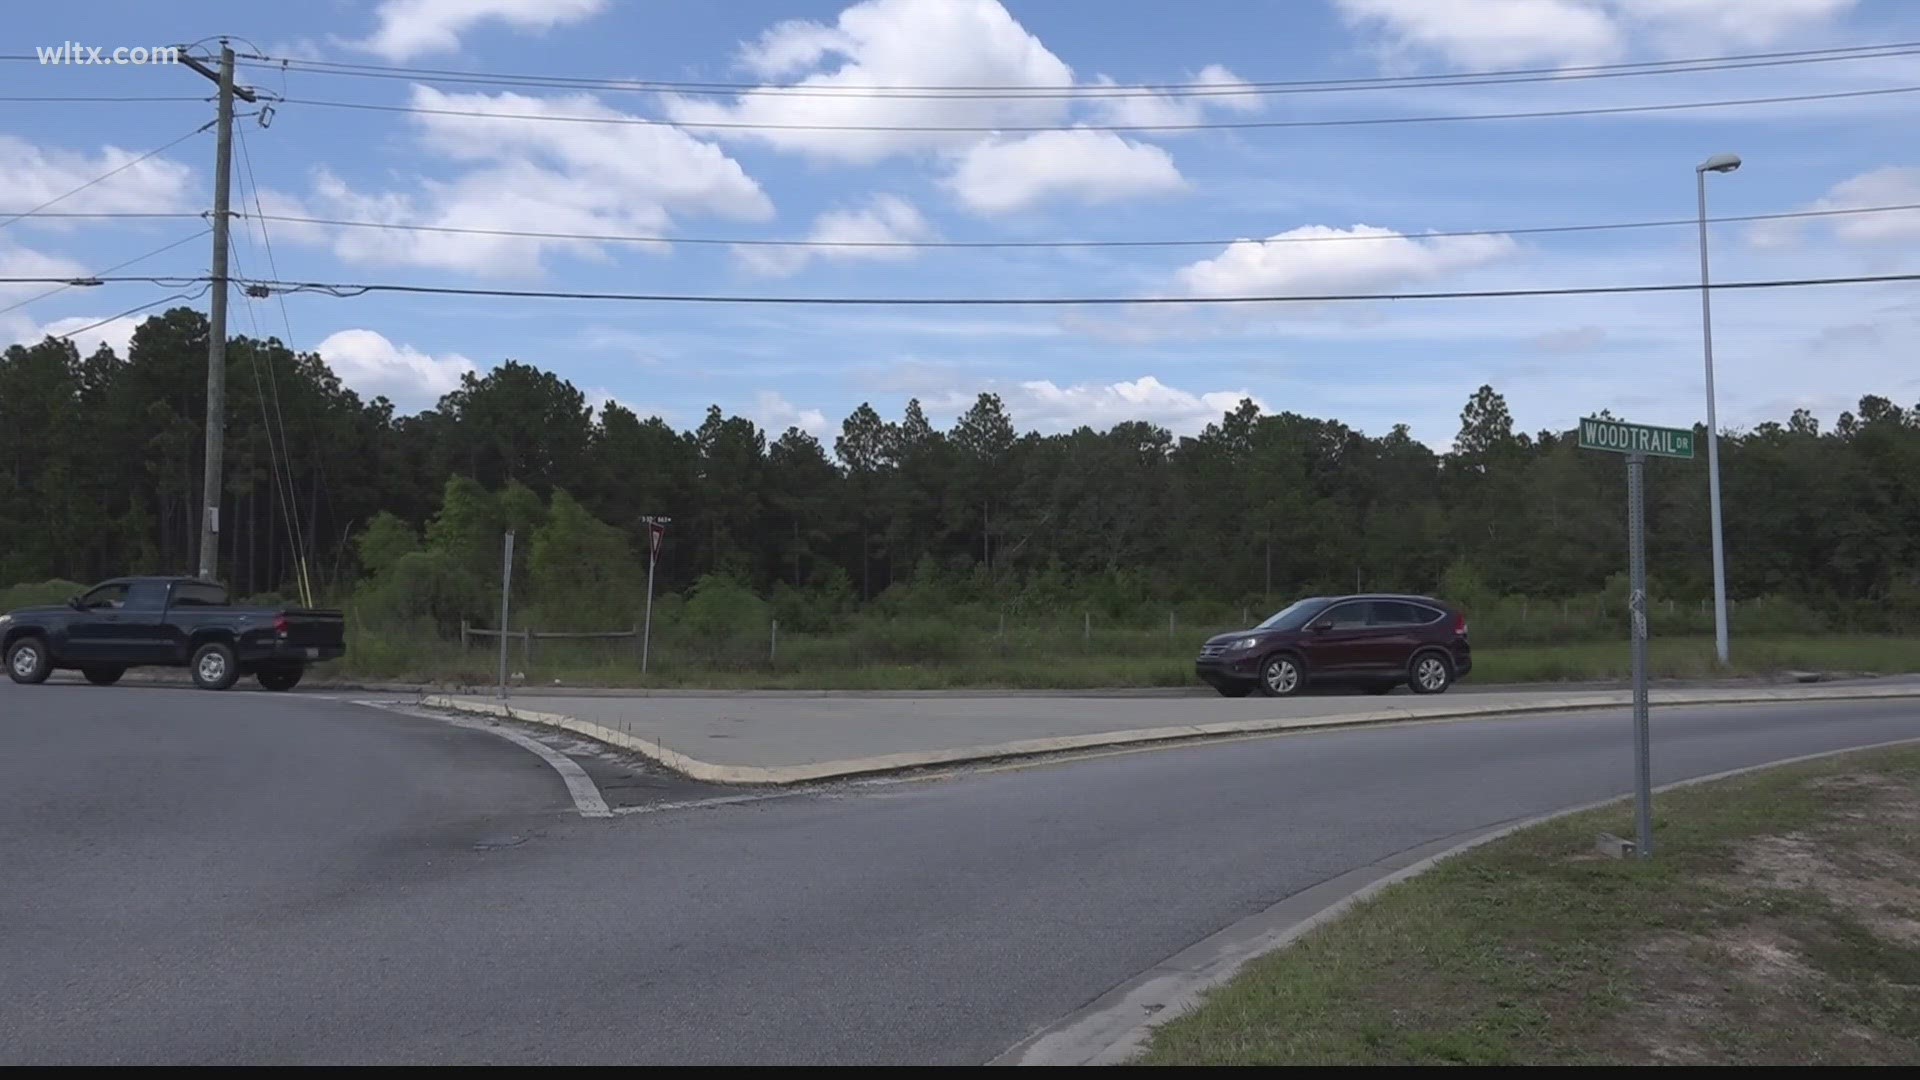 SCDOT is in charge of keeping the area clean and say contractors are expected in a few weeks to clean up the area.